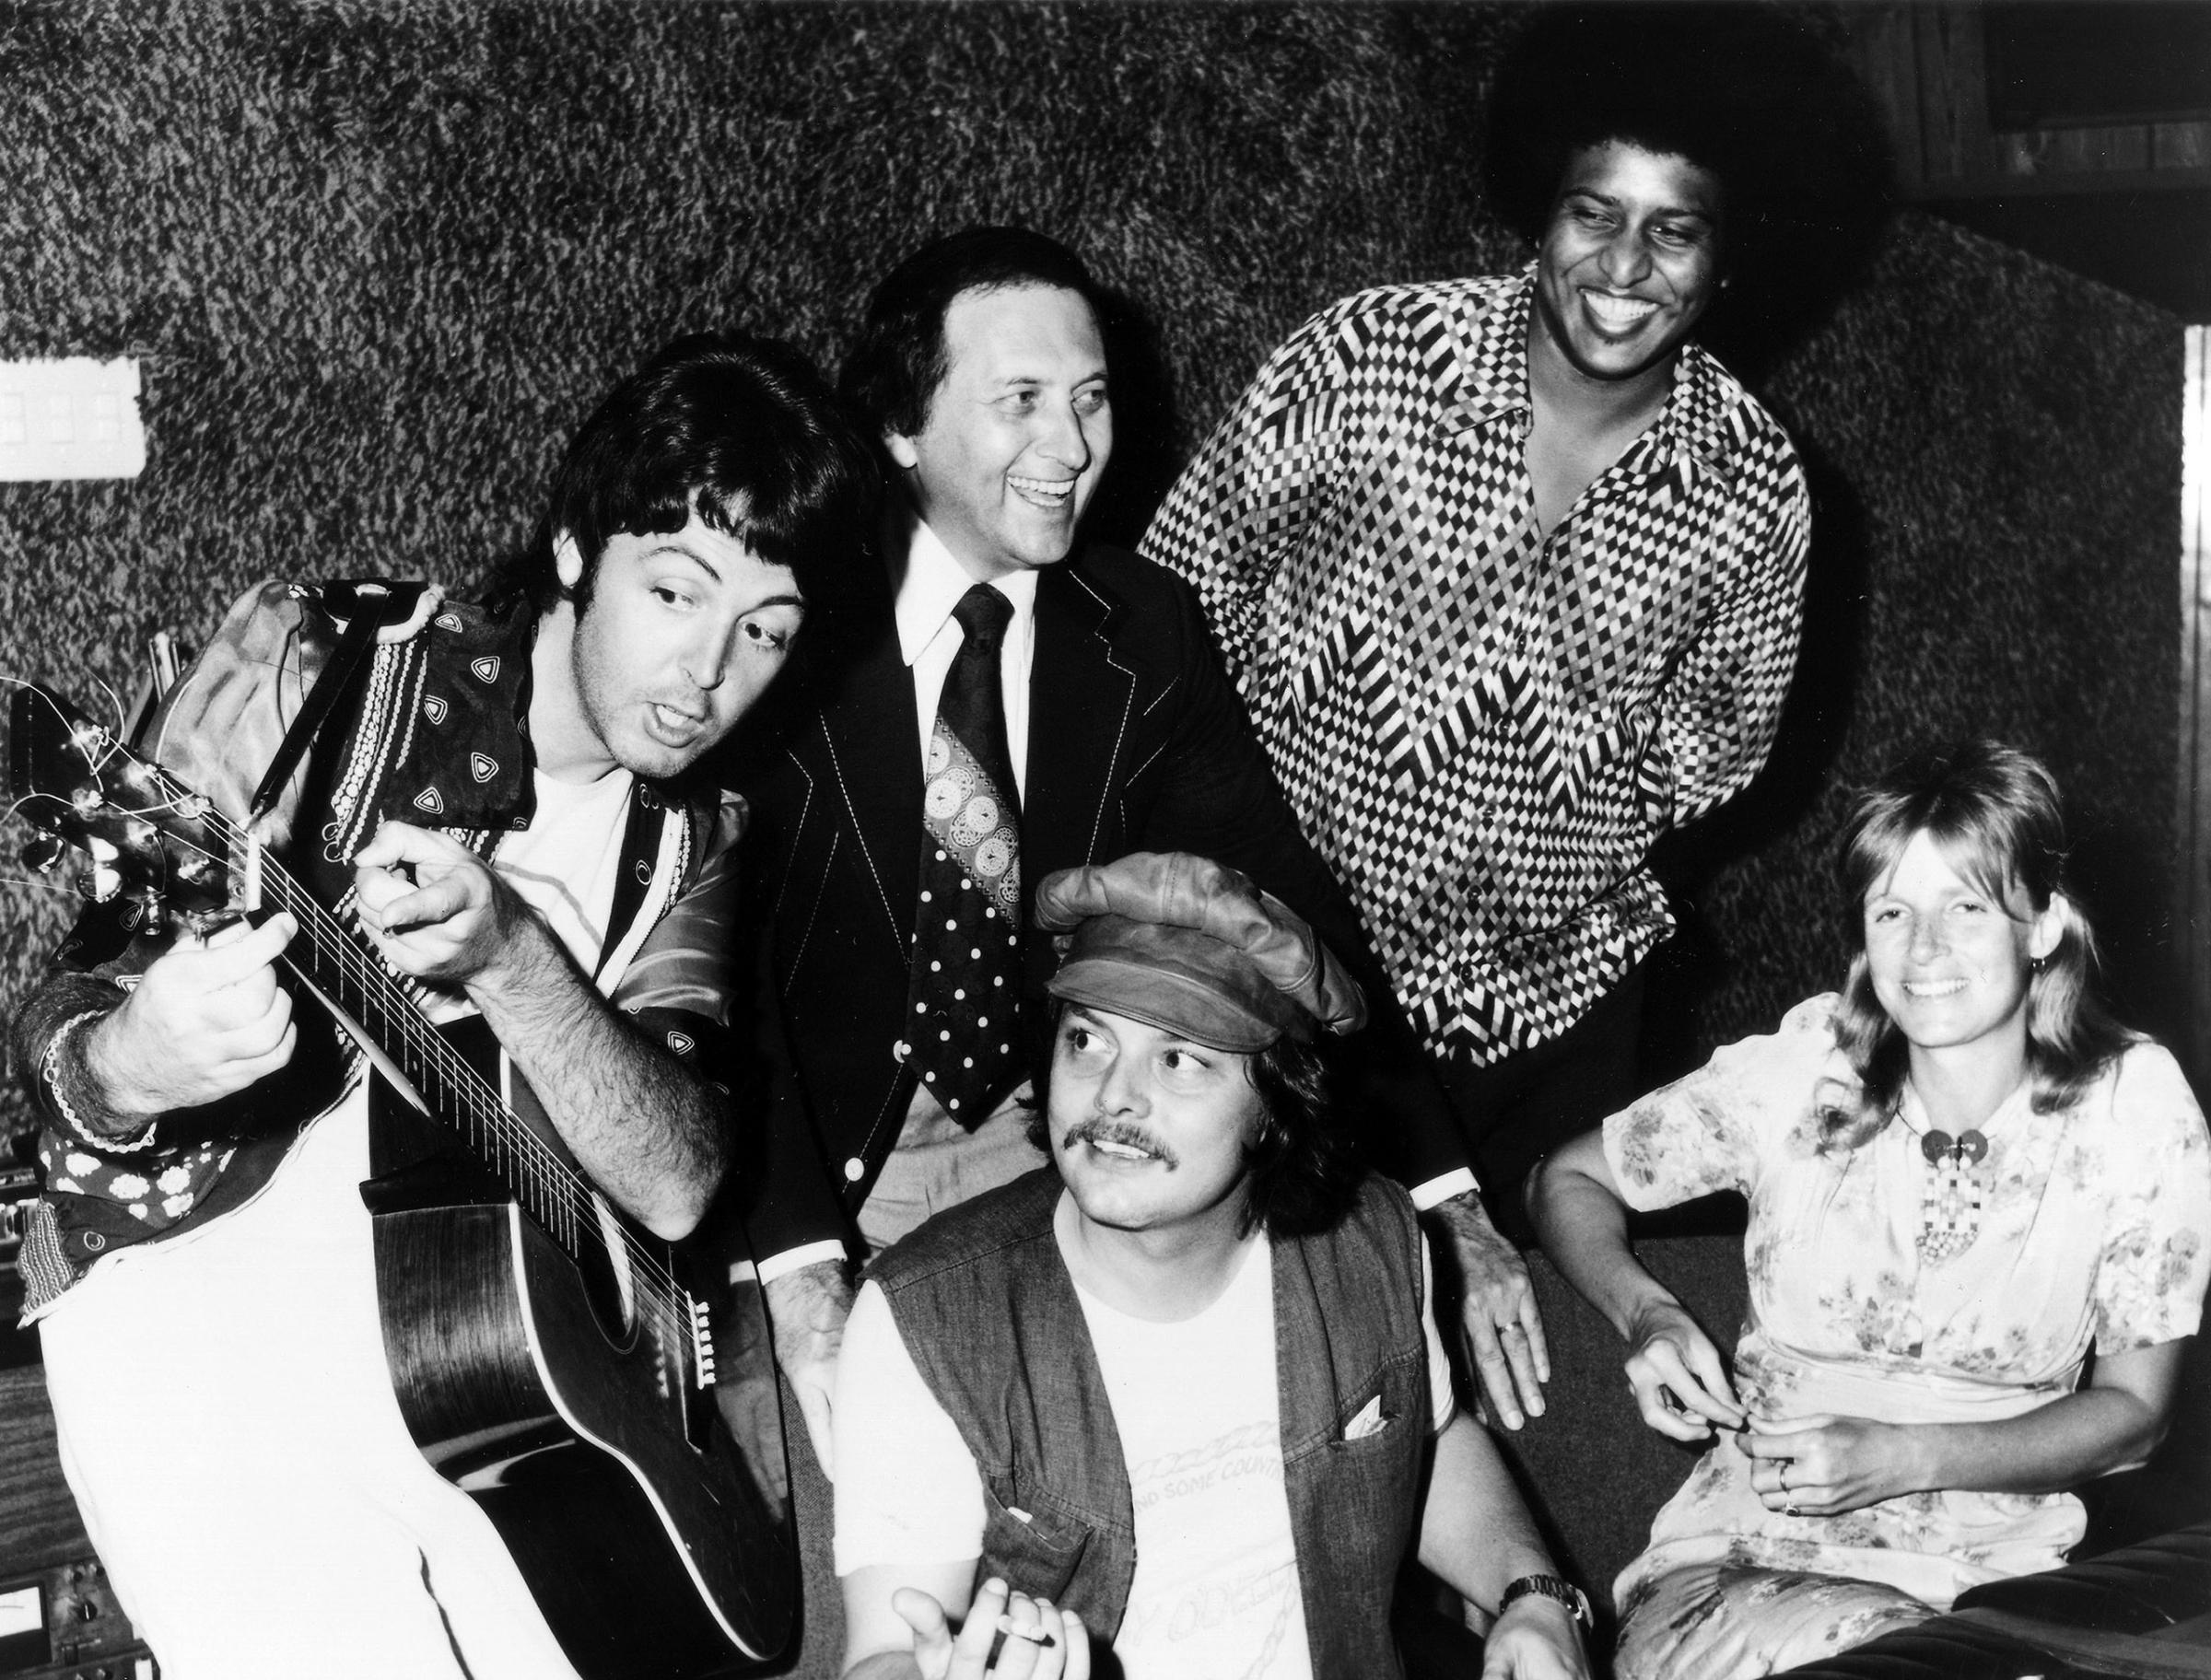 Pictured recoding at Soundshop in 1974 are (l-r): Paul McCartney, Buddy Killen, Ernie Winfrey (seated), Tony Dorsey, and Linda McCartney (seated).